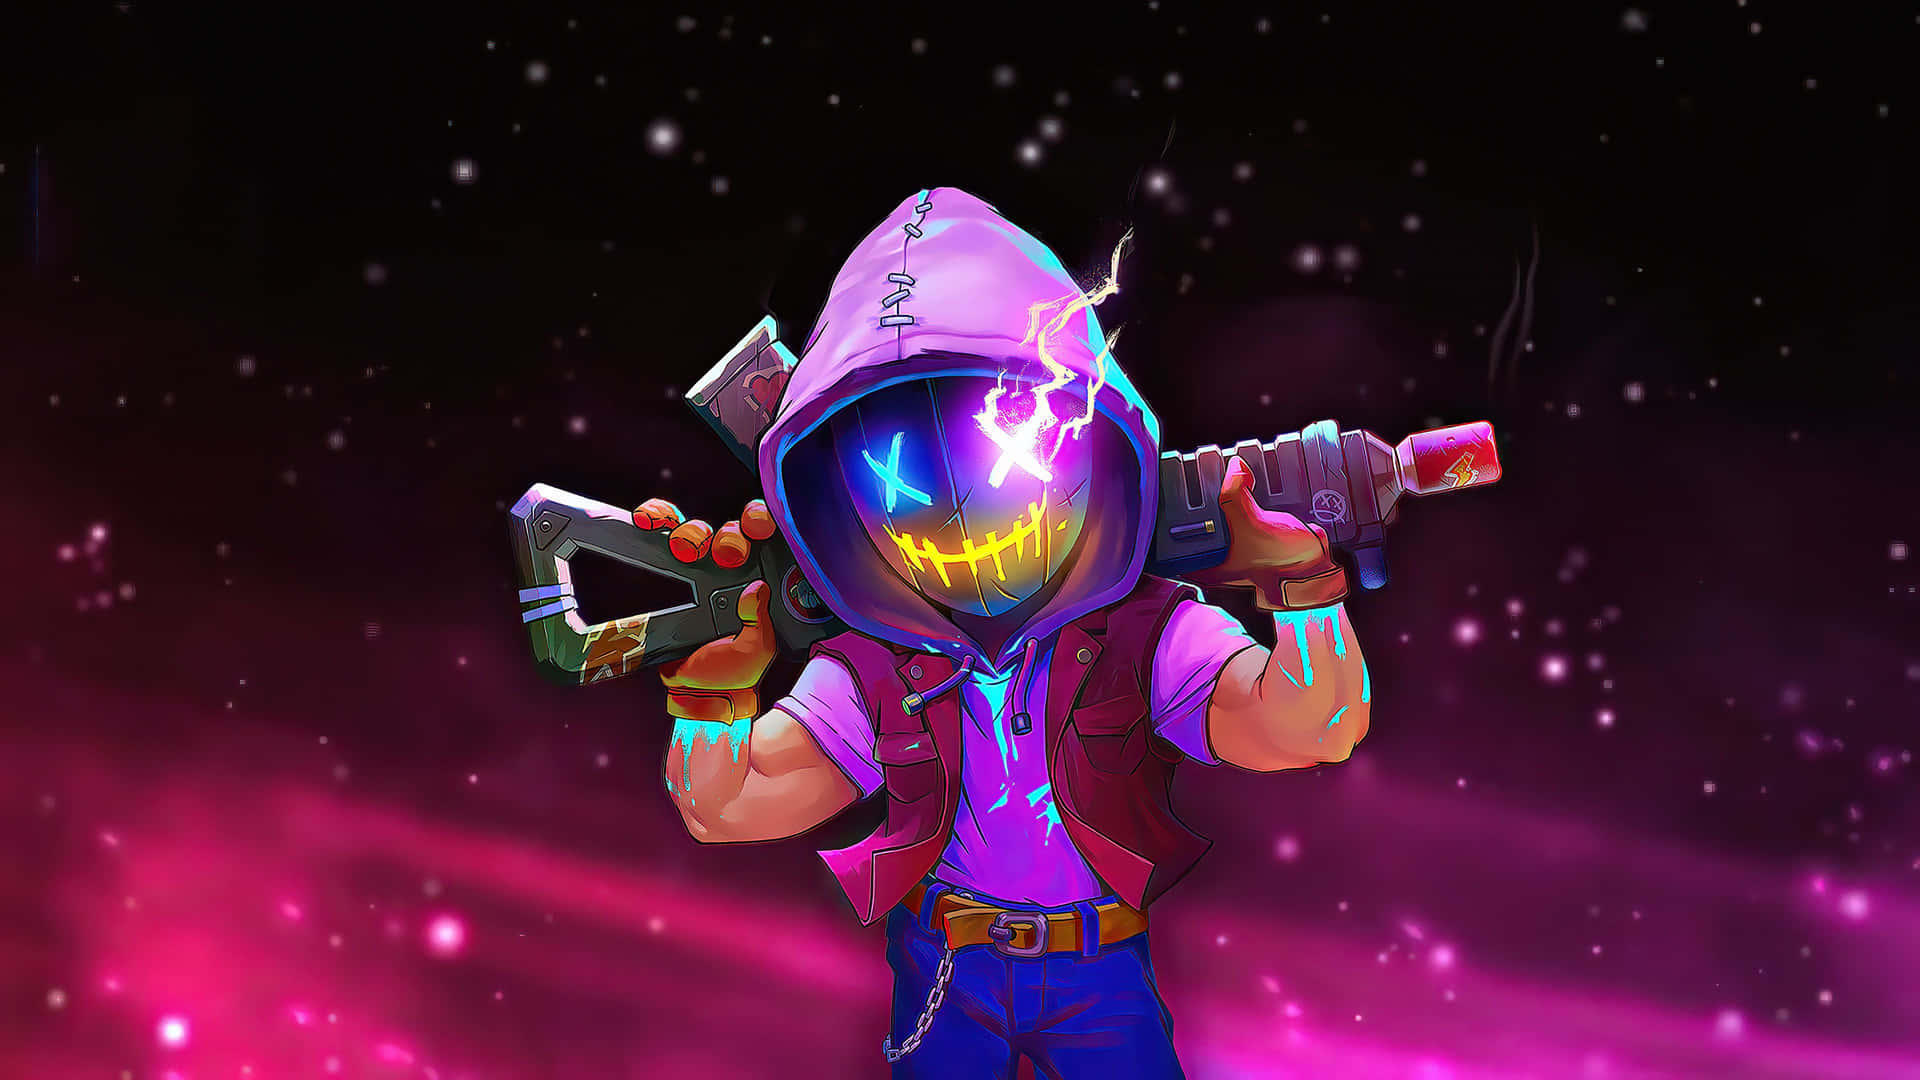 Neon Hooded Figurewith Energy Weapon Wallpaper